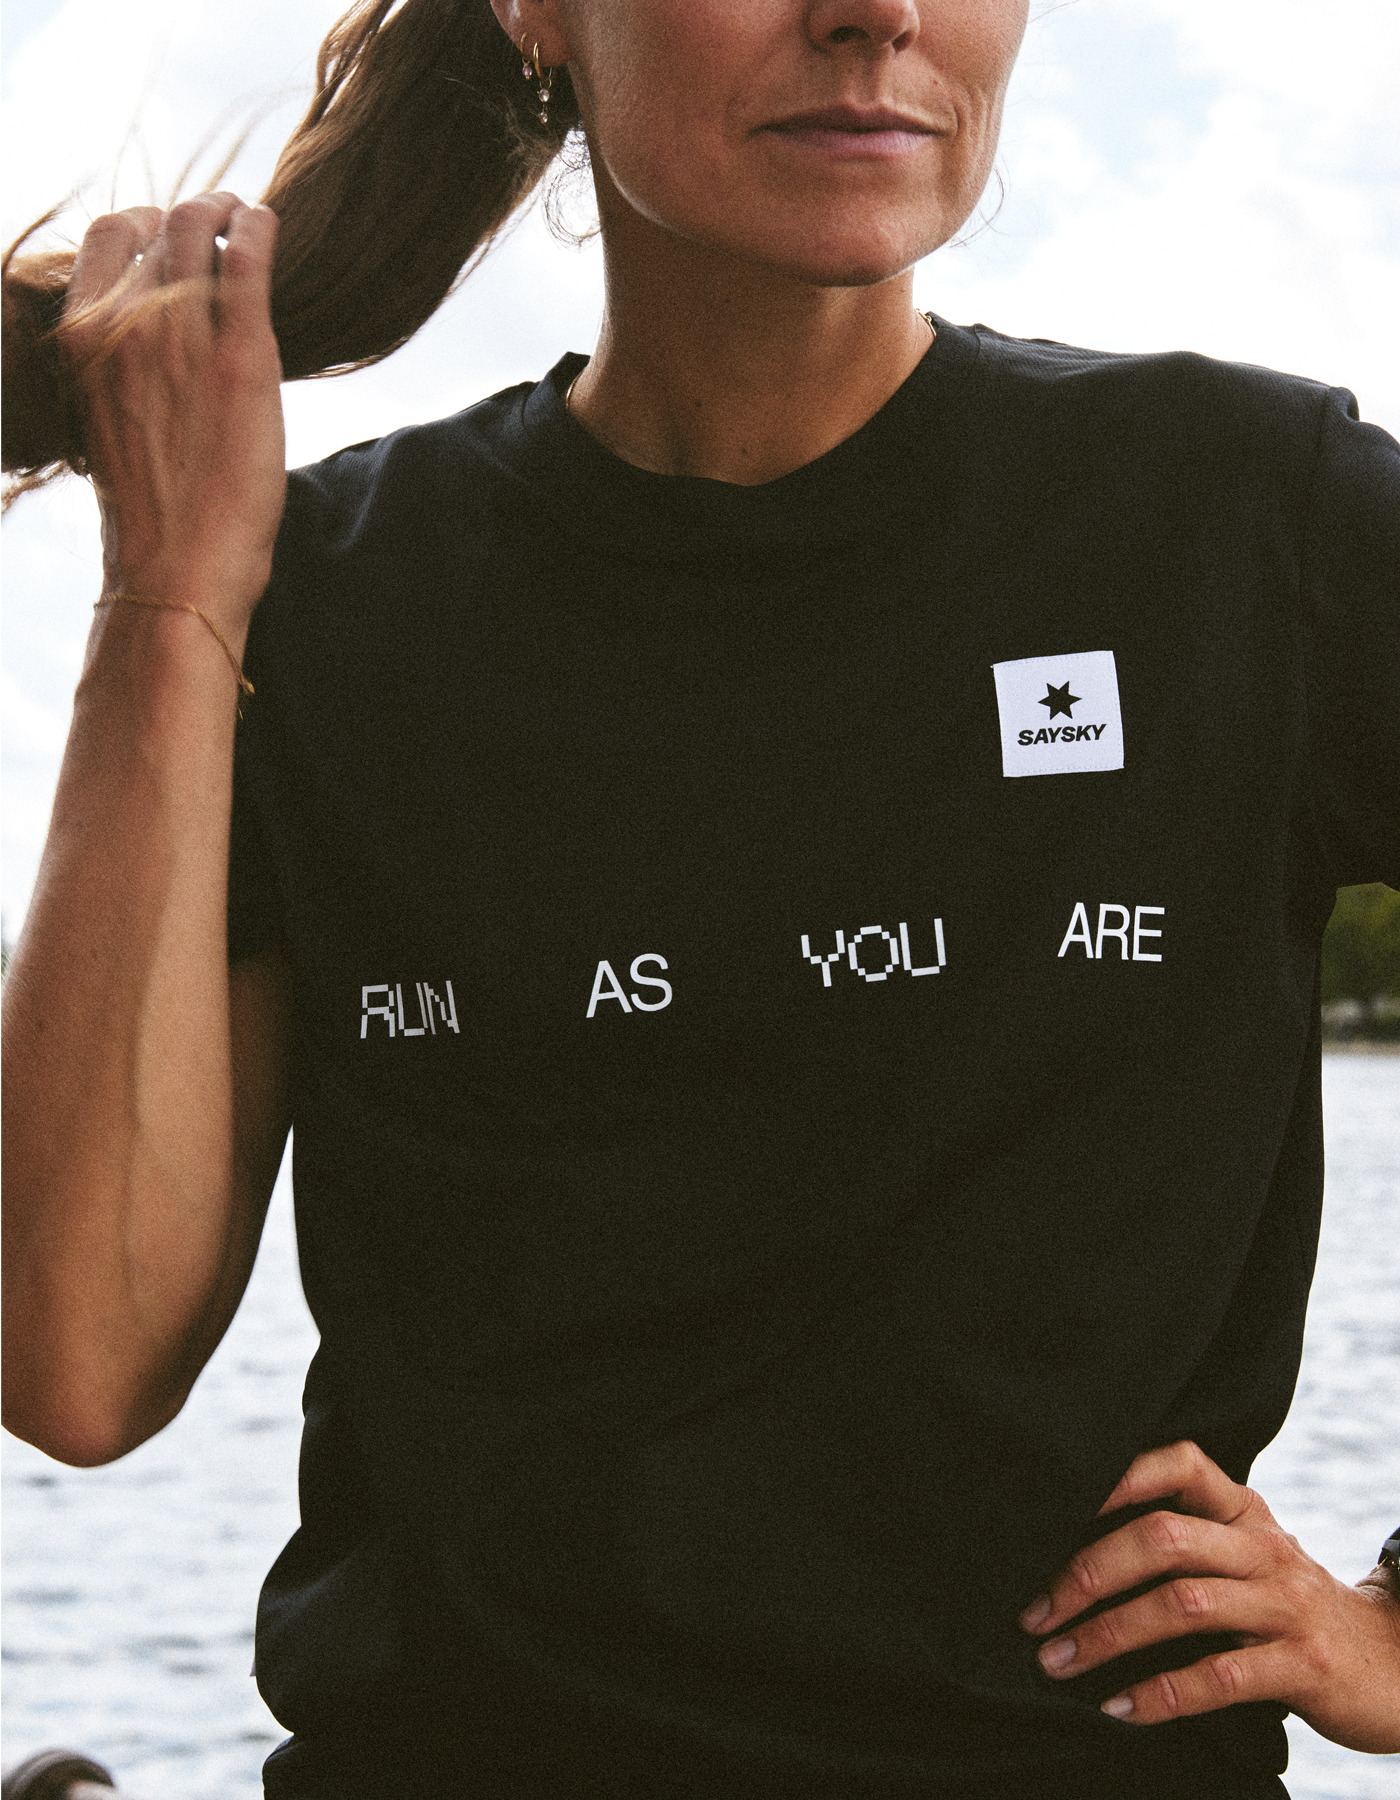 Clean Combat T-Shirt for Run As You Are - Unisex